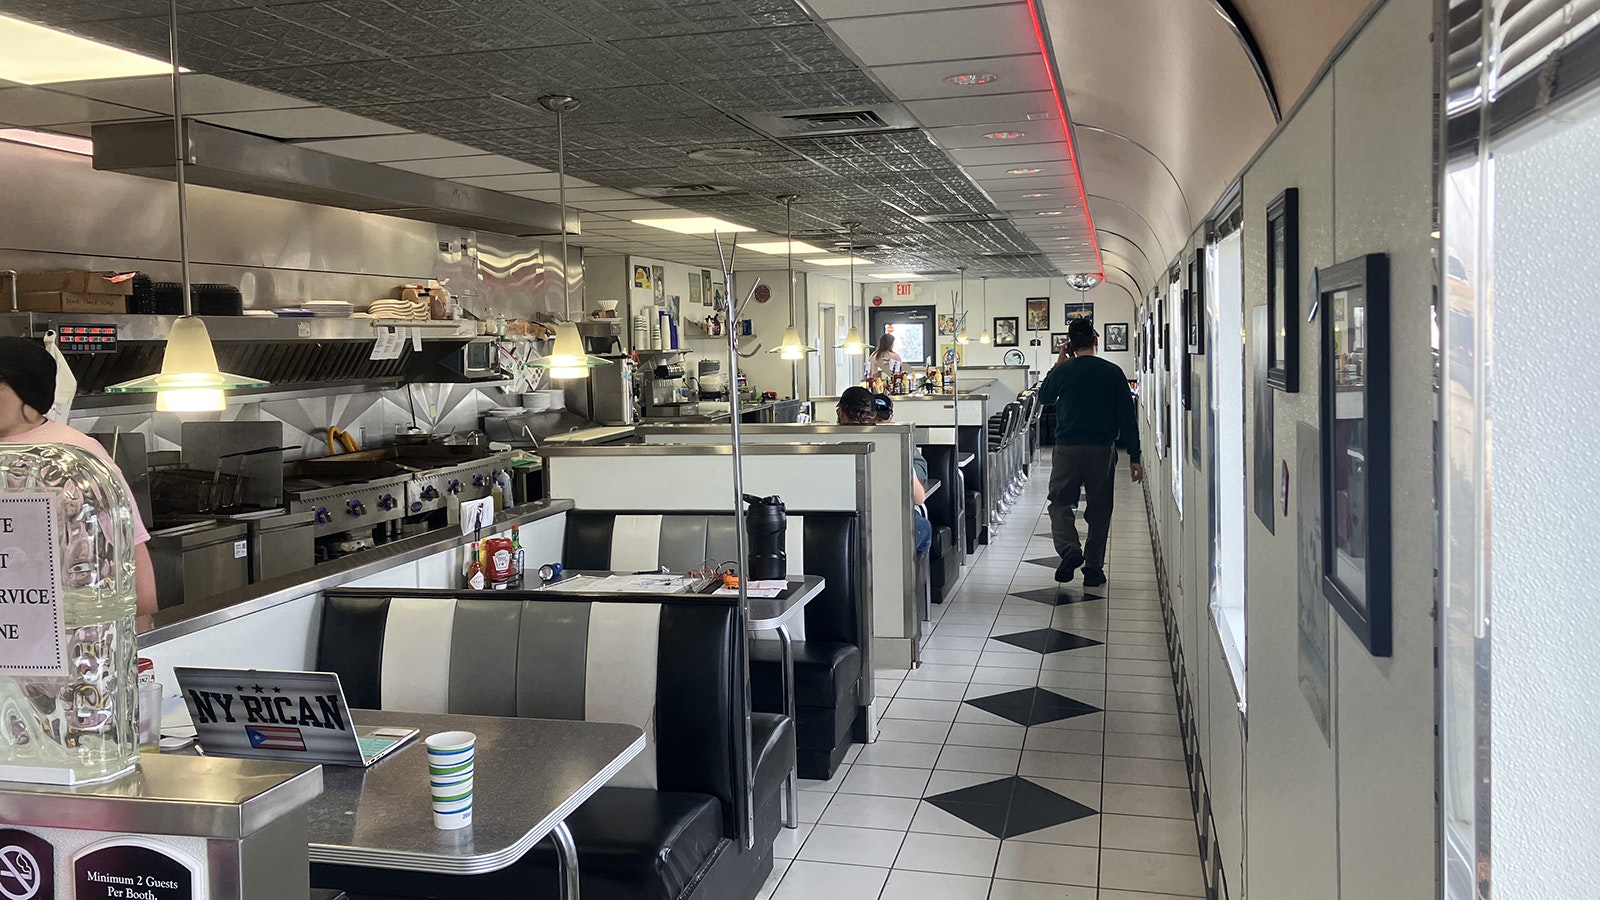 The interior of the Penny’s Diner is designed to reflect the 1950s. Its menu offers burgers, sandwiches, dinners, and breakfast items. The restaurant is open 24 hours a day.